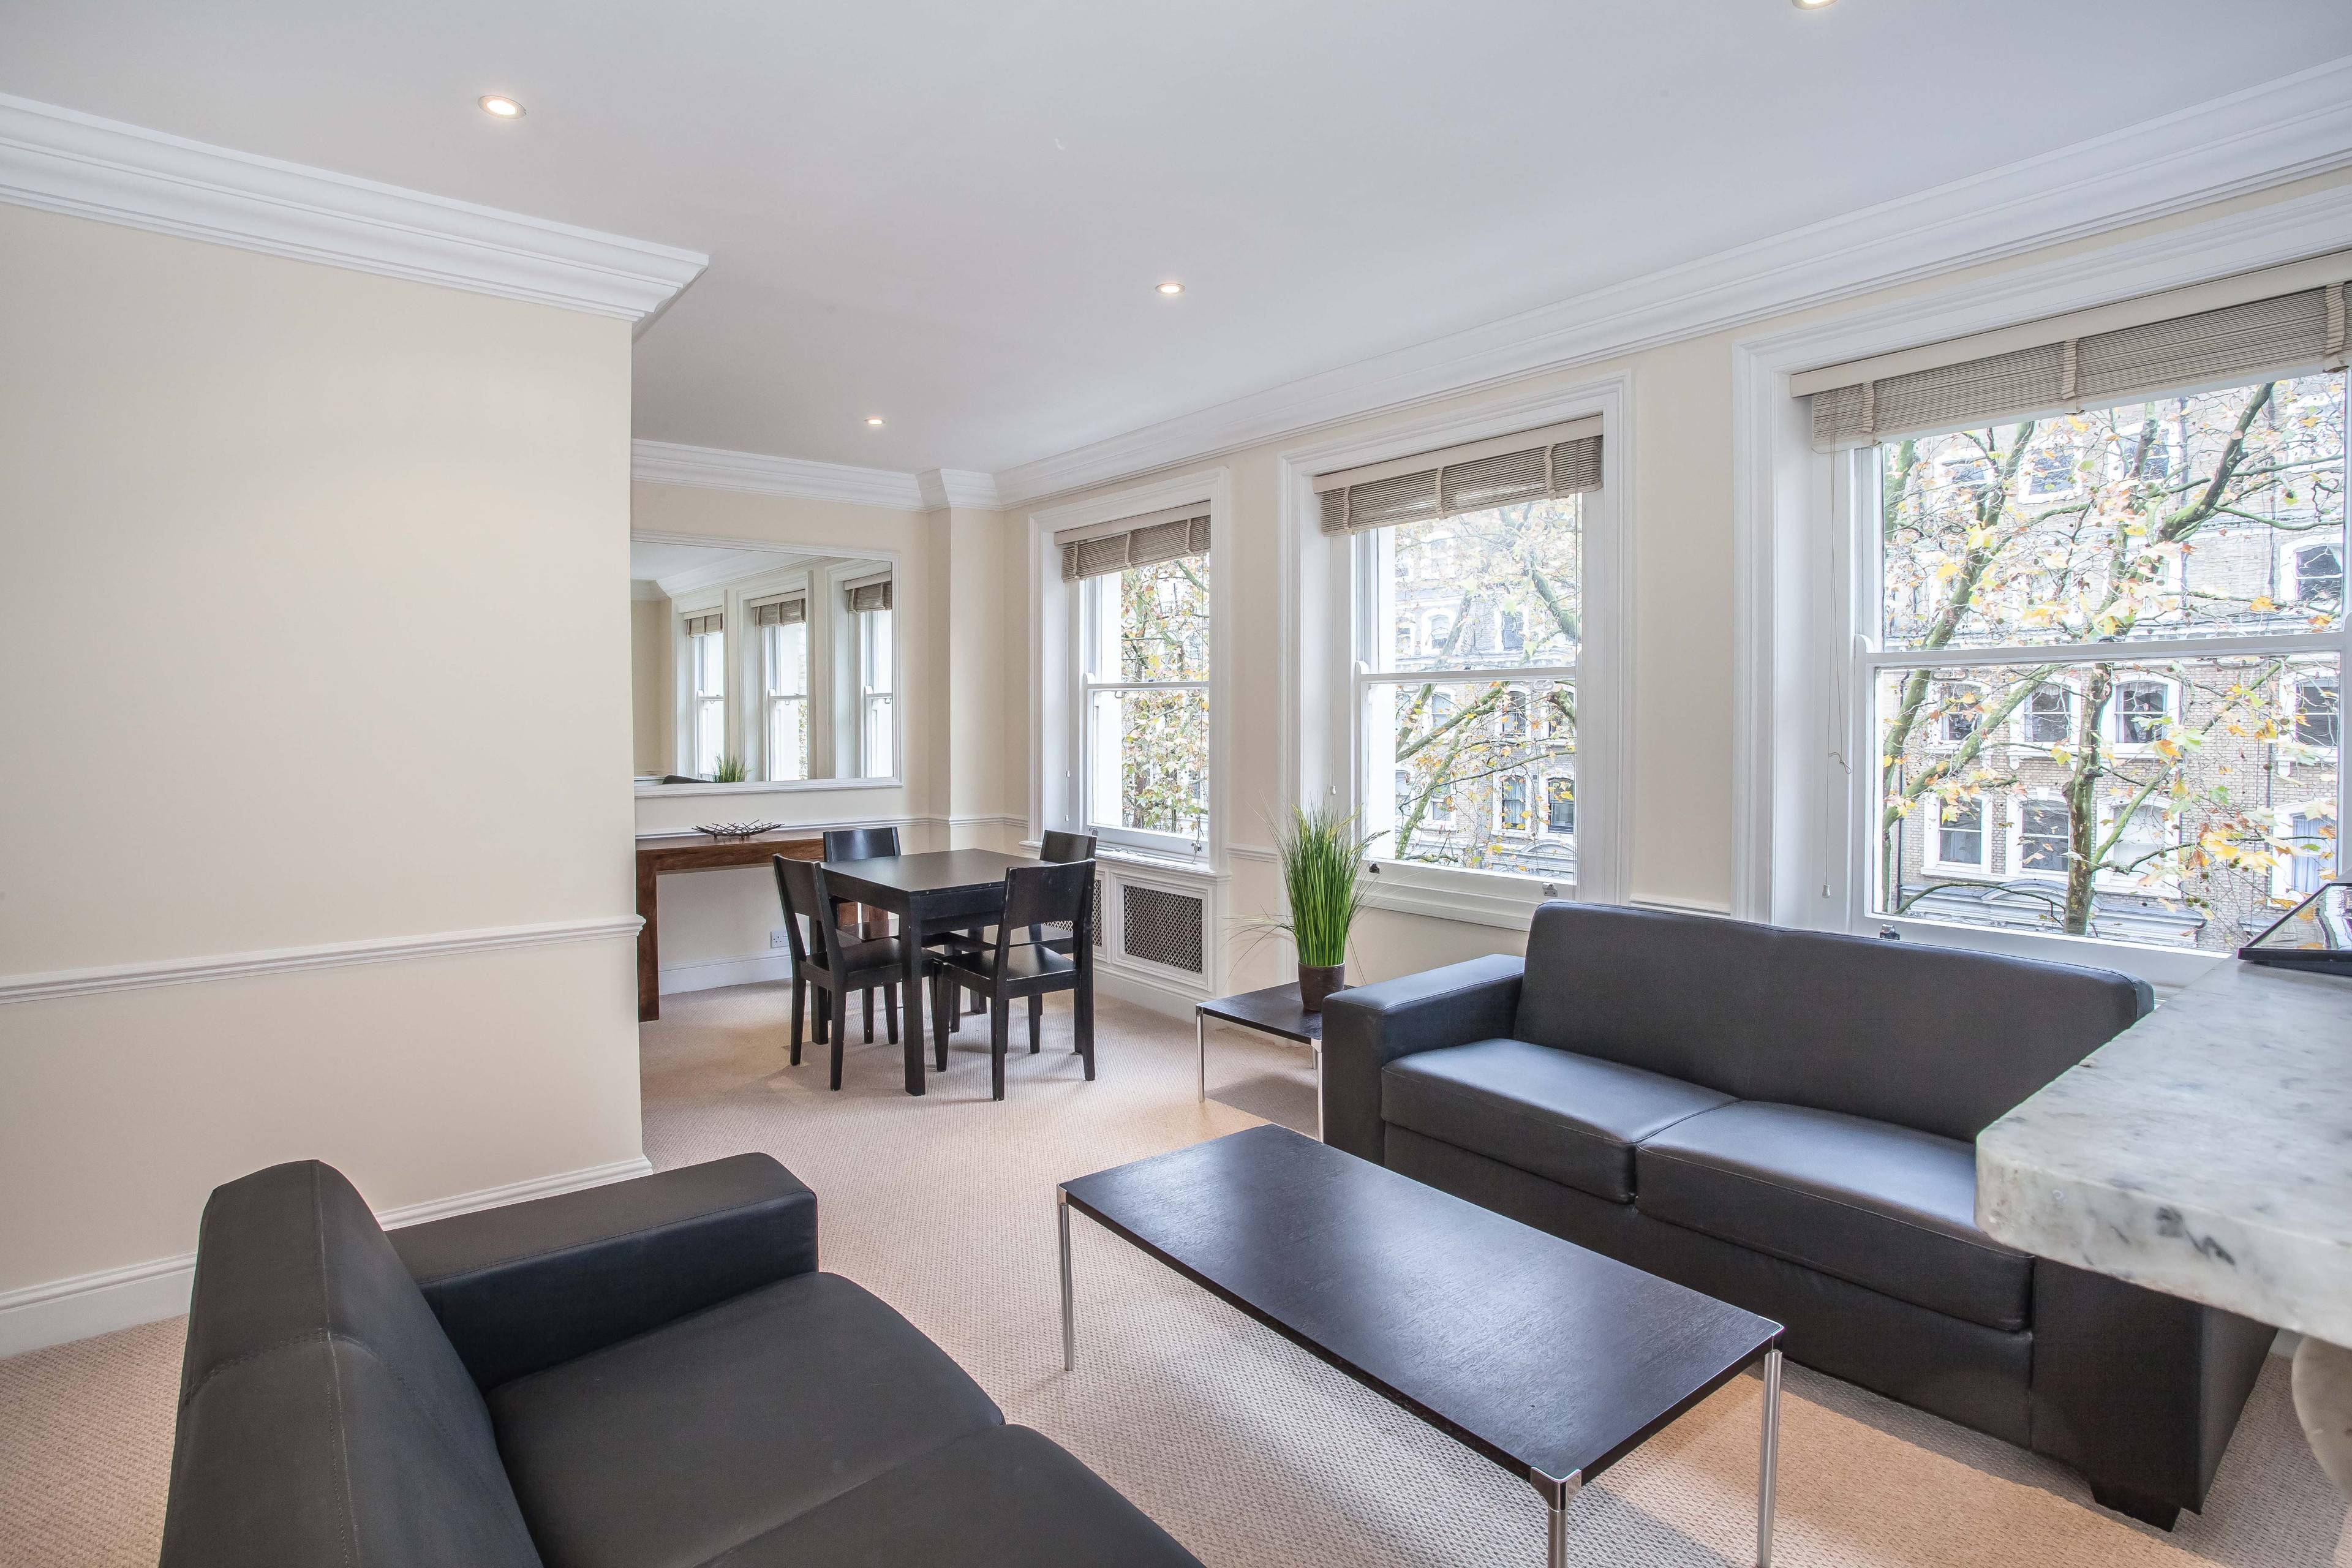 Beautiful 2 bedroom apartment for rent in the heart of Knightsbridge